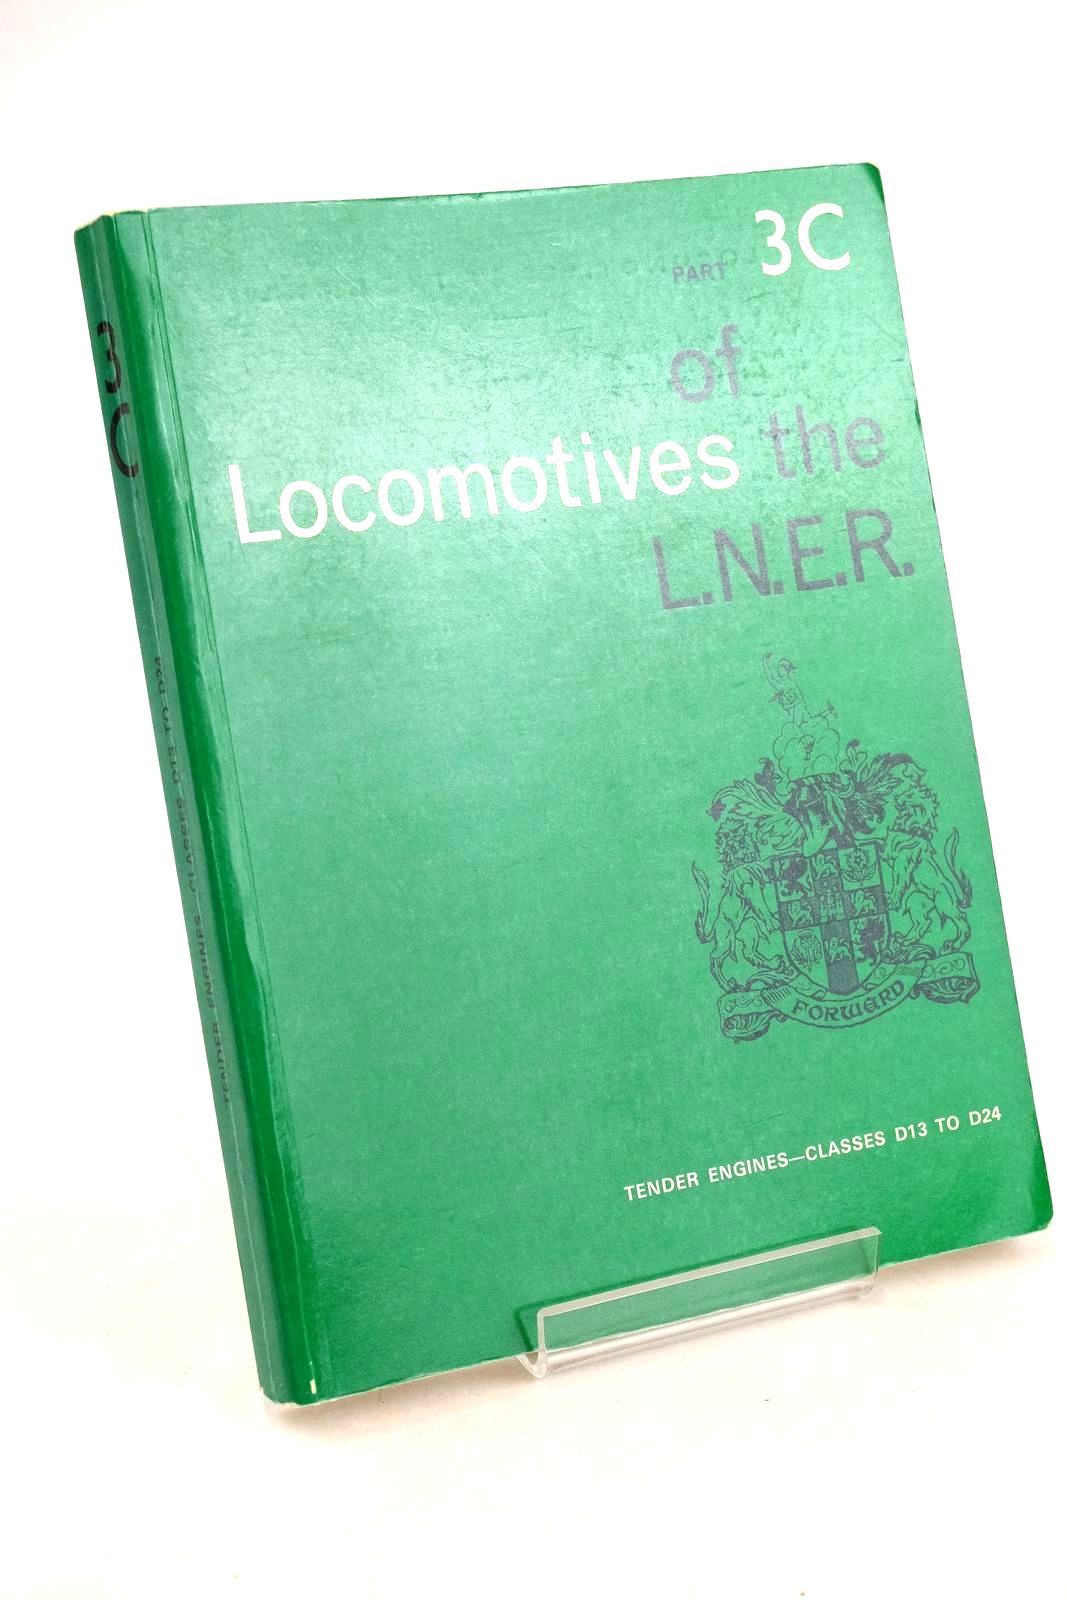 Photo of LOCOMOTIVES OF THE L.N.E.R. PART 3C published by The Railway Correspondence And Travel Society (STOCK CODE: 1327346)  for sale by Stella & Rose's Books